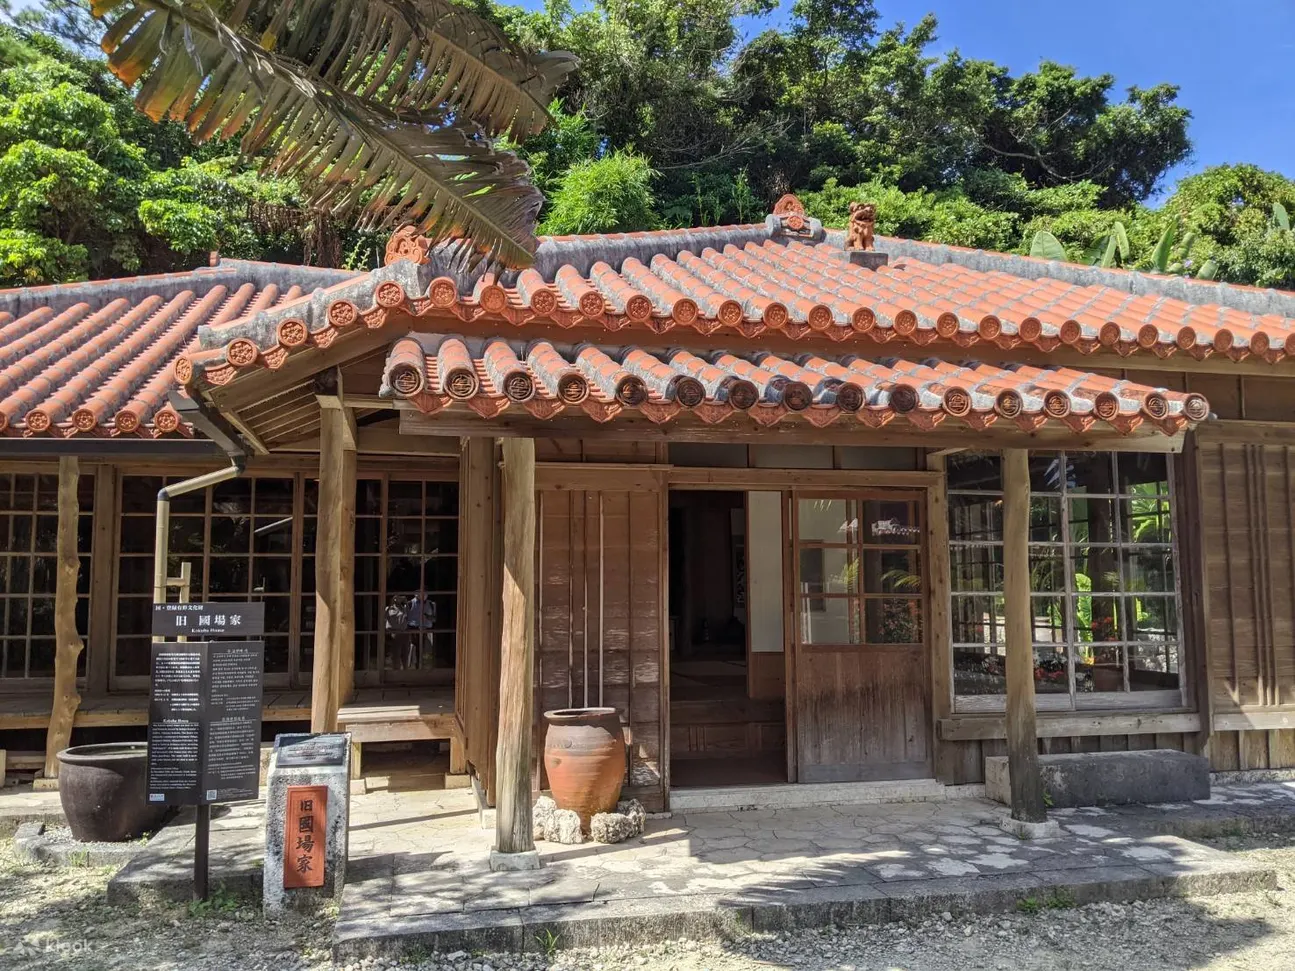 Okinawa Fun Pass - Discount Coupons for Shopping at Drugstores